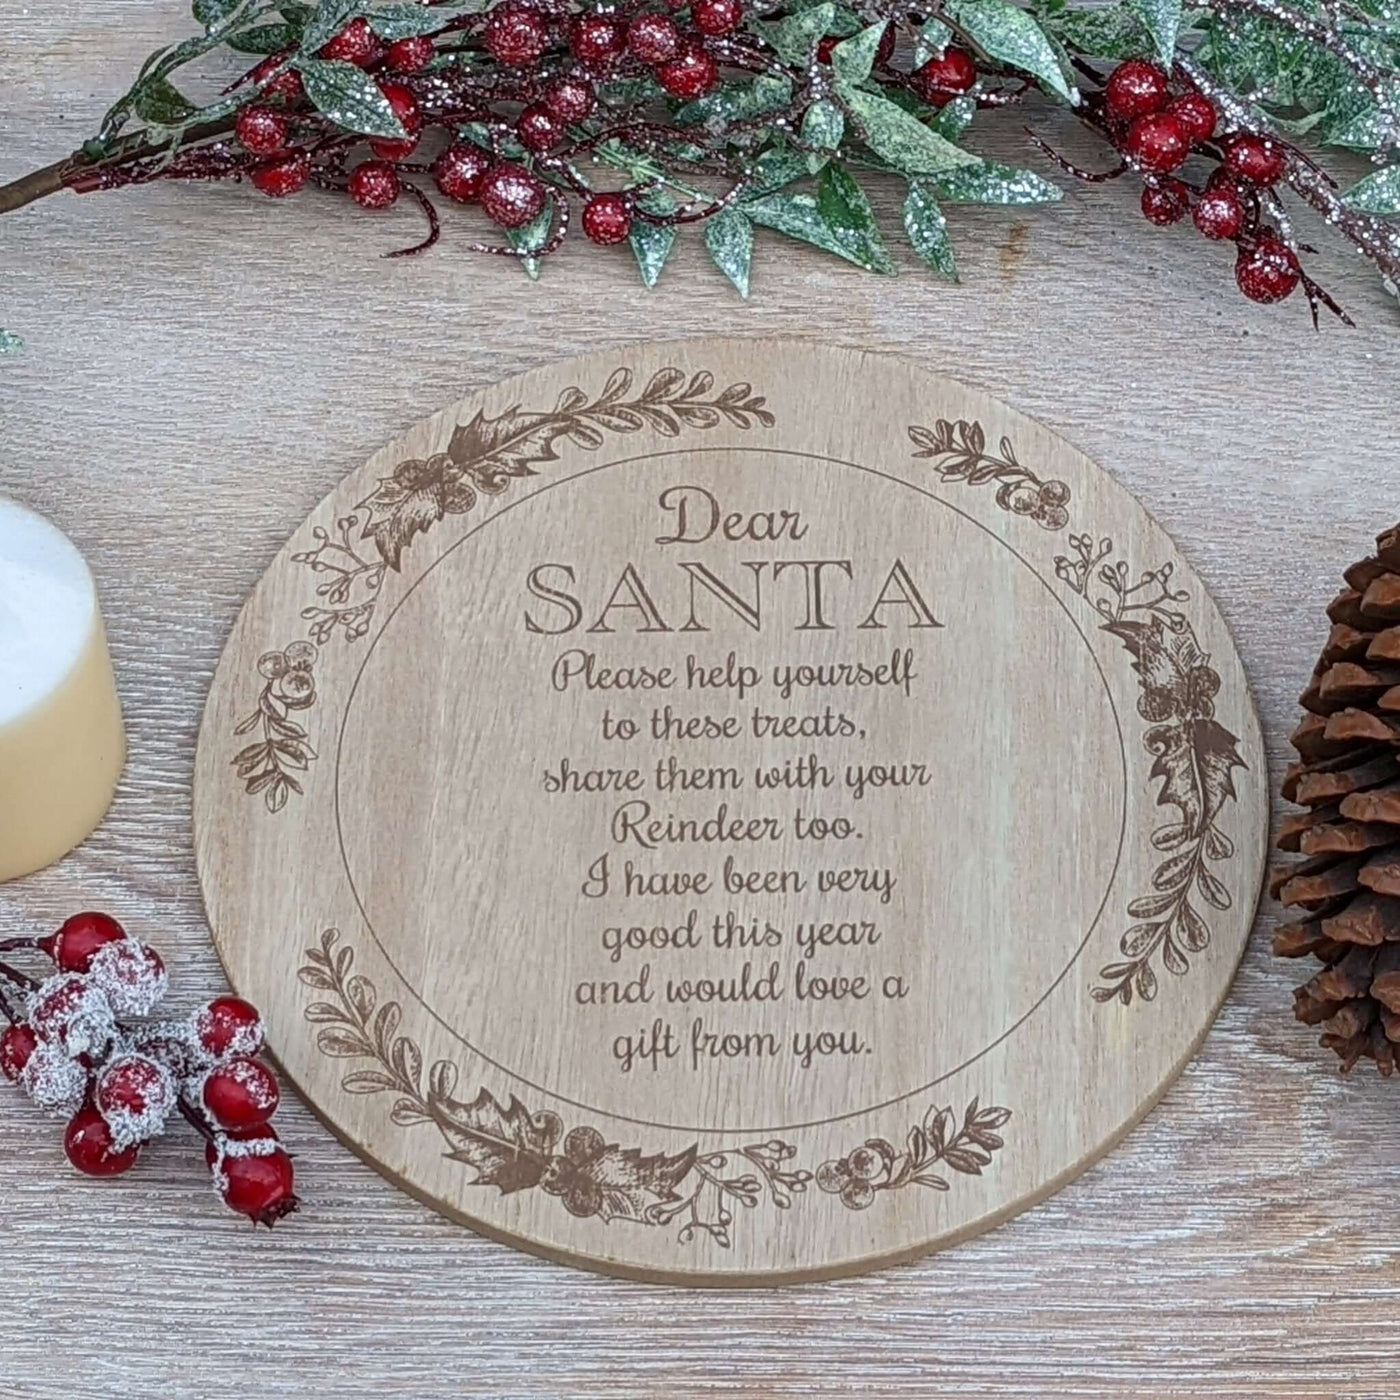 Dear Santa Large Round Wooden Treat Tray / Coaster - LIVE LAUGH LOVE LIMITED